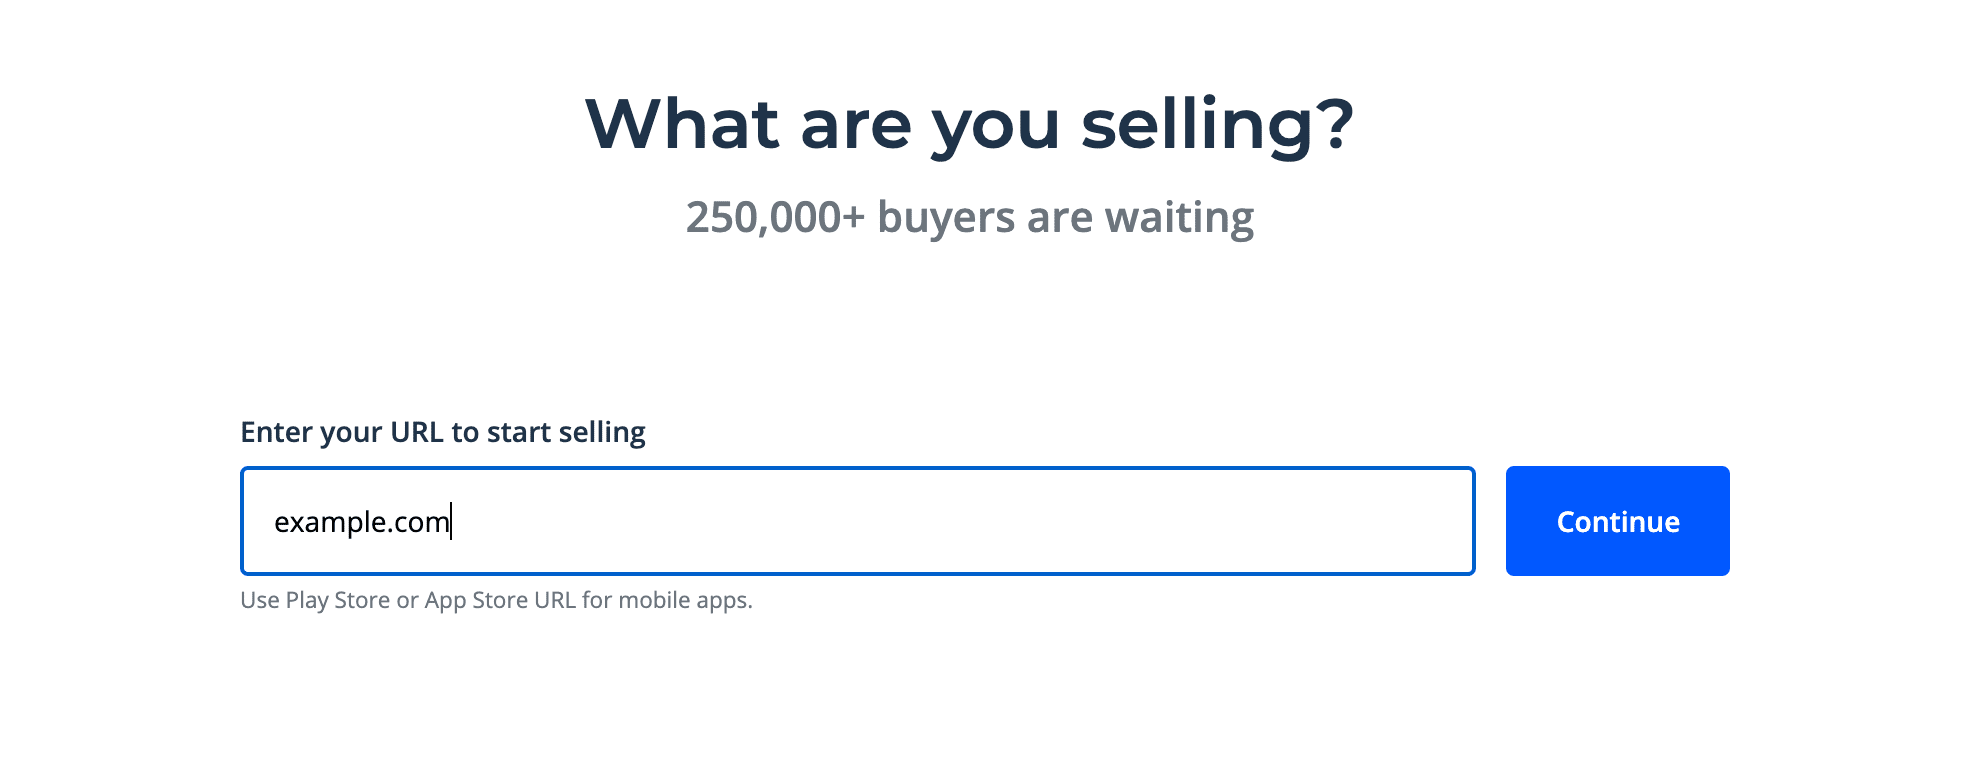 Entering the domain you want to sell on Flippa.